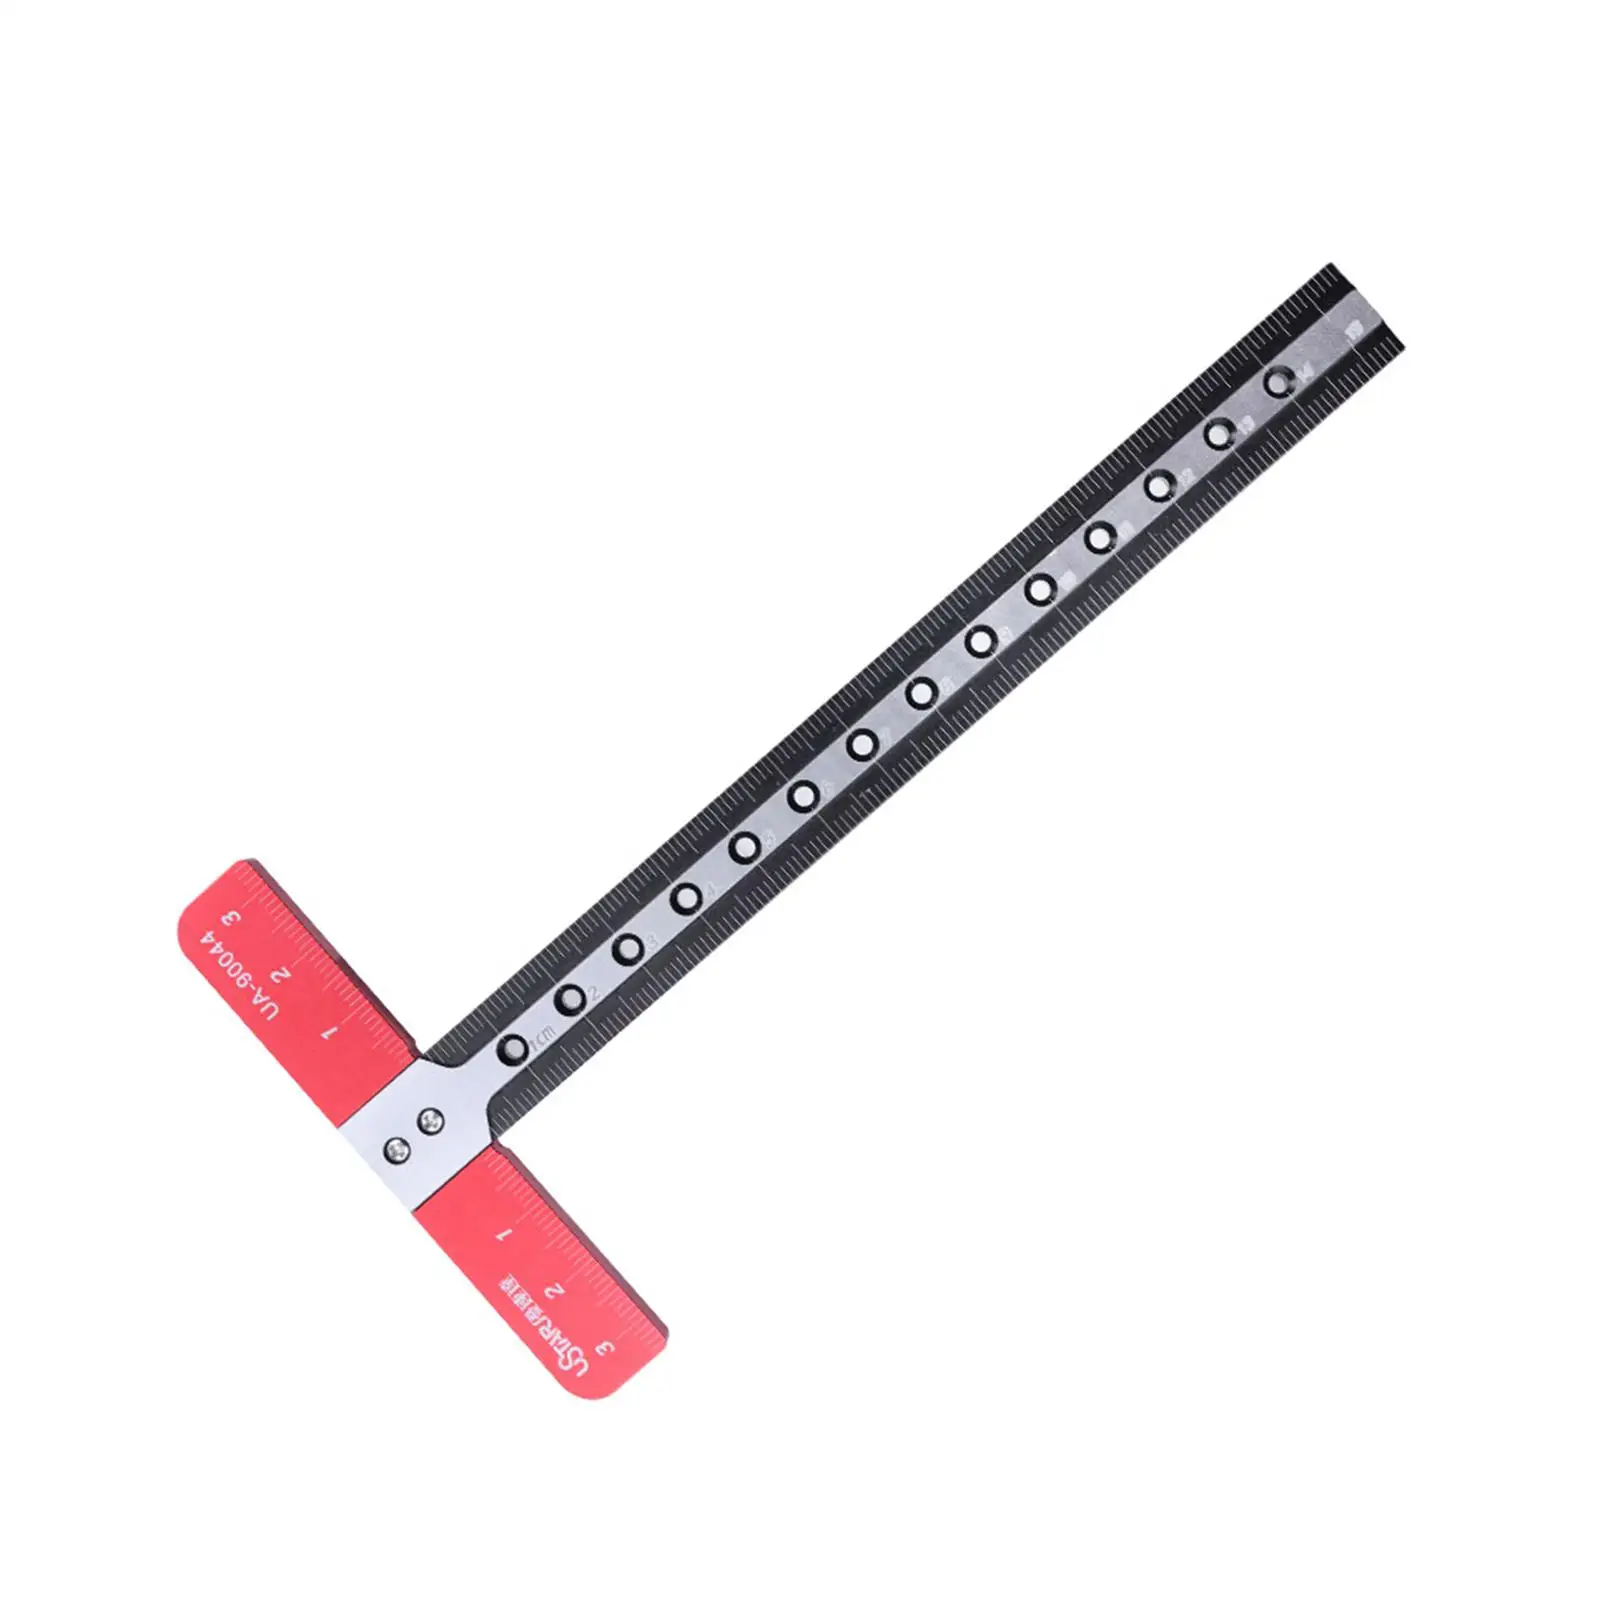 T Square Ruler Measure Tools Shape Positioning Ruler -90044 for 170Mmx85mm